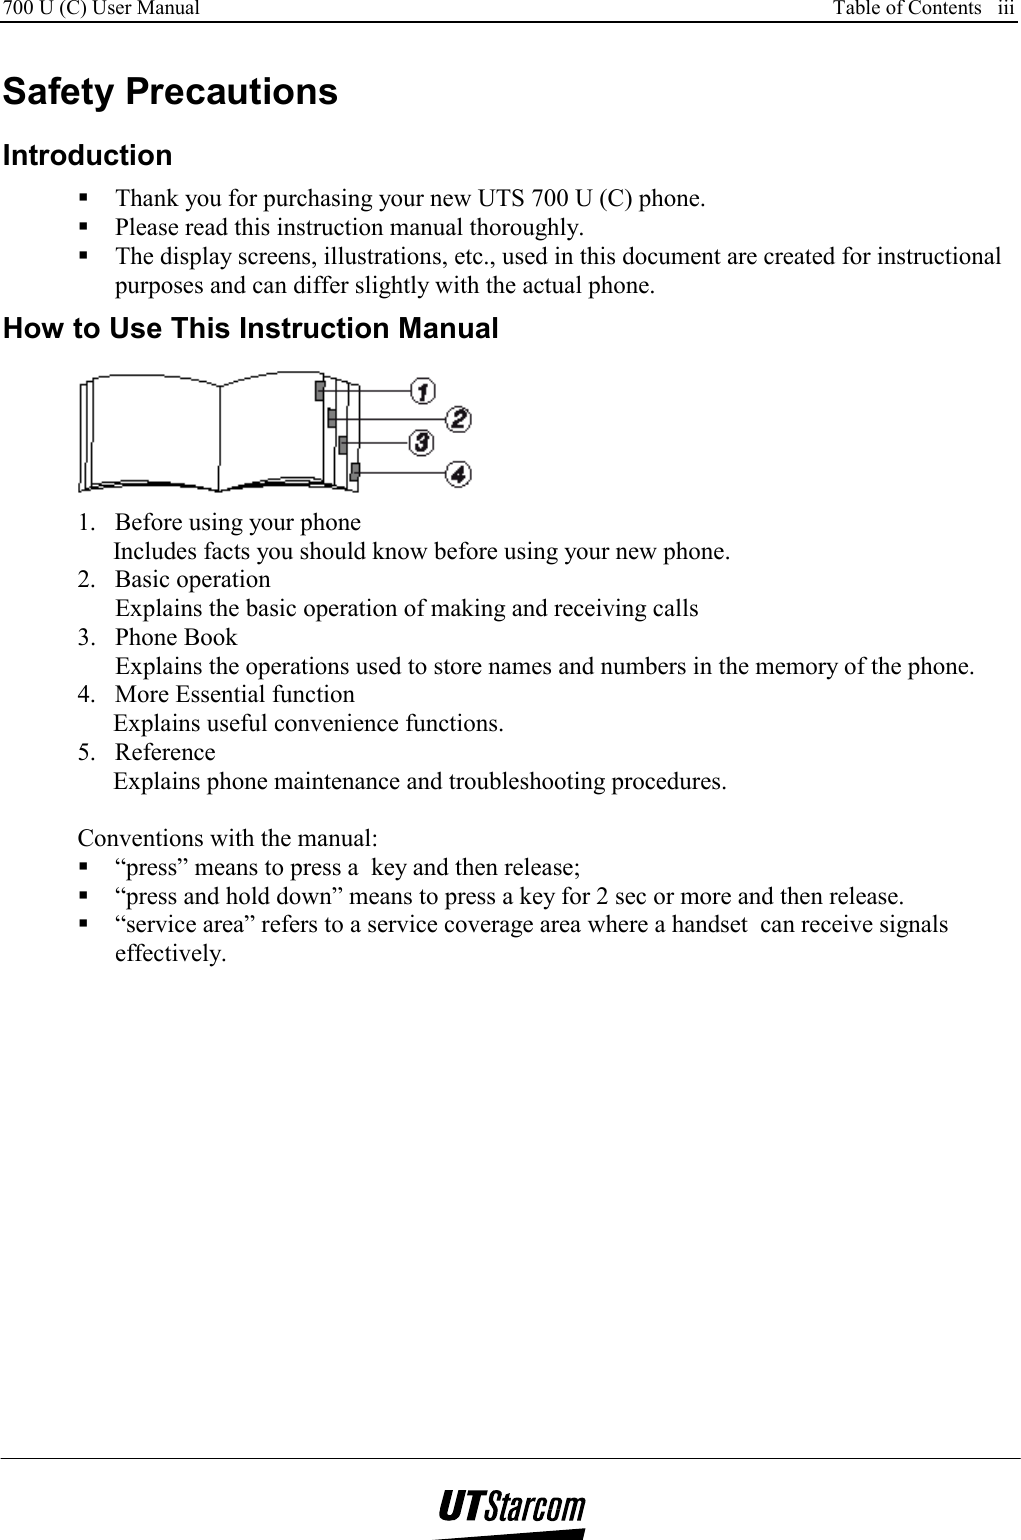 700 U (C) User Manual      Table of Contents   iii    Safety Precautions Introduction  Thank you for purchasing your new UTS 700 U (C) phone.  Please read this instruction manual thoroughly.  The display screens, illustrations, etc., used in this document are created for instructional purposes and can differ slightly with the actual phone.  How to Use This Instruction Manual  1.  Before using your phone Includes facts you should know before using your new phone. 2. Basic operation Explains the basic operation of making and receiving calls 3.  Phone Book  Explains the operations used to store names and numbers in the memory of the phone. 4.  More Essential function Explains useful convenience functions. 5. Reference Explains phone maintenance and troubleshooting procedures.  Conventions with the manual:  “press” means to press a  key and then release;  “press and hold down” means to press a key for 2 sec or more and then release.  “service area” refers to a service coverage area where a handset  can receive signals effectively. 